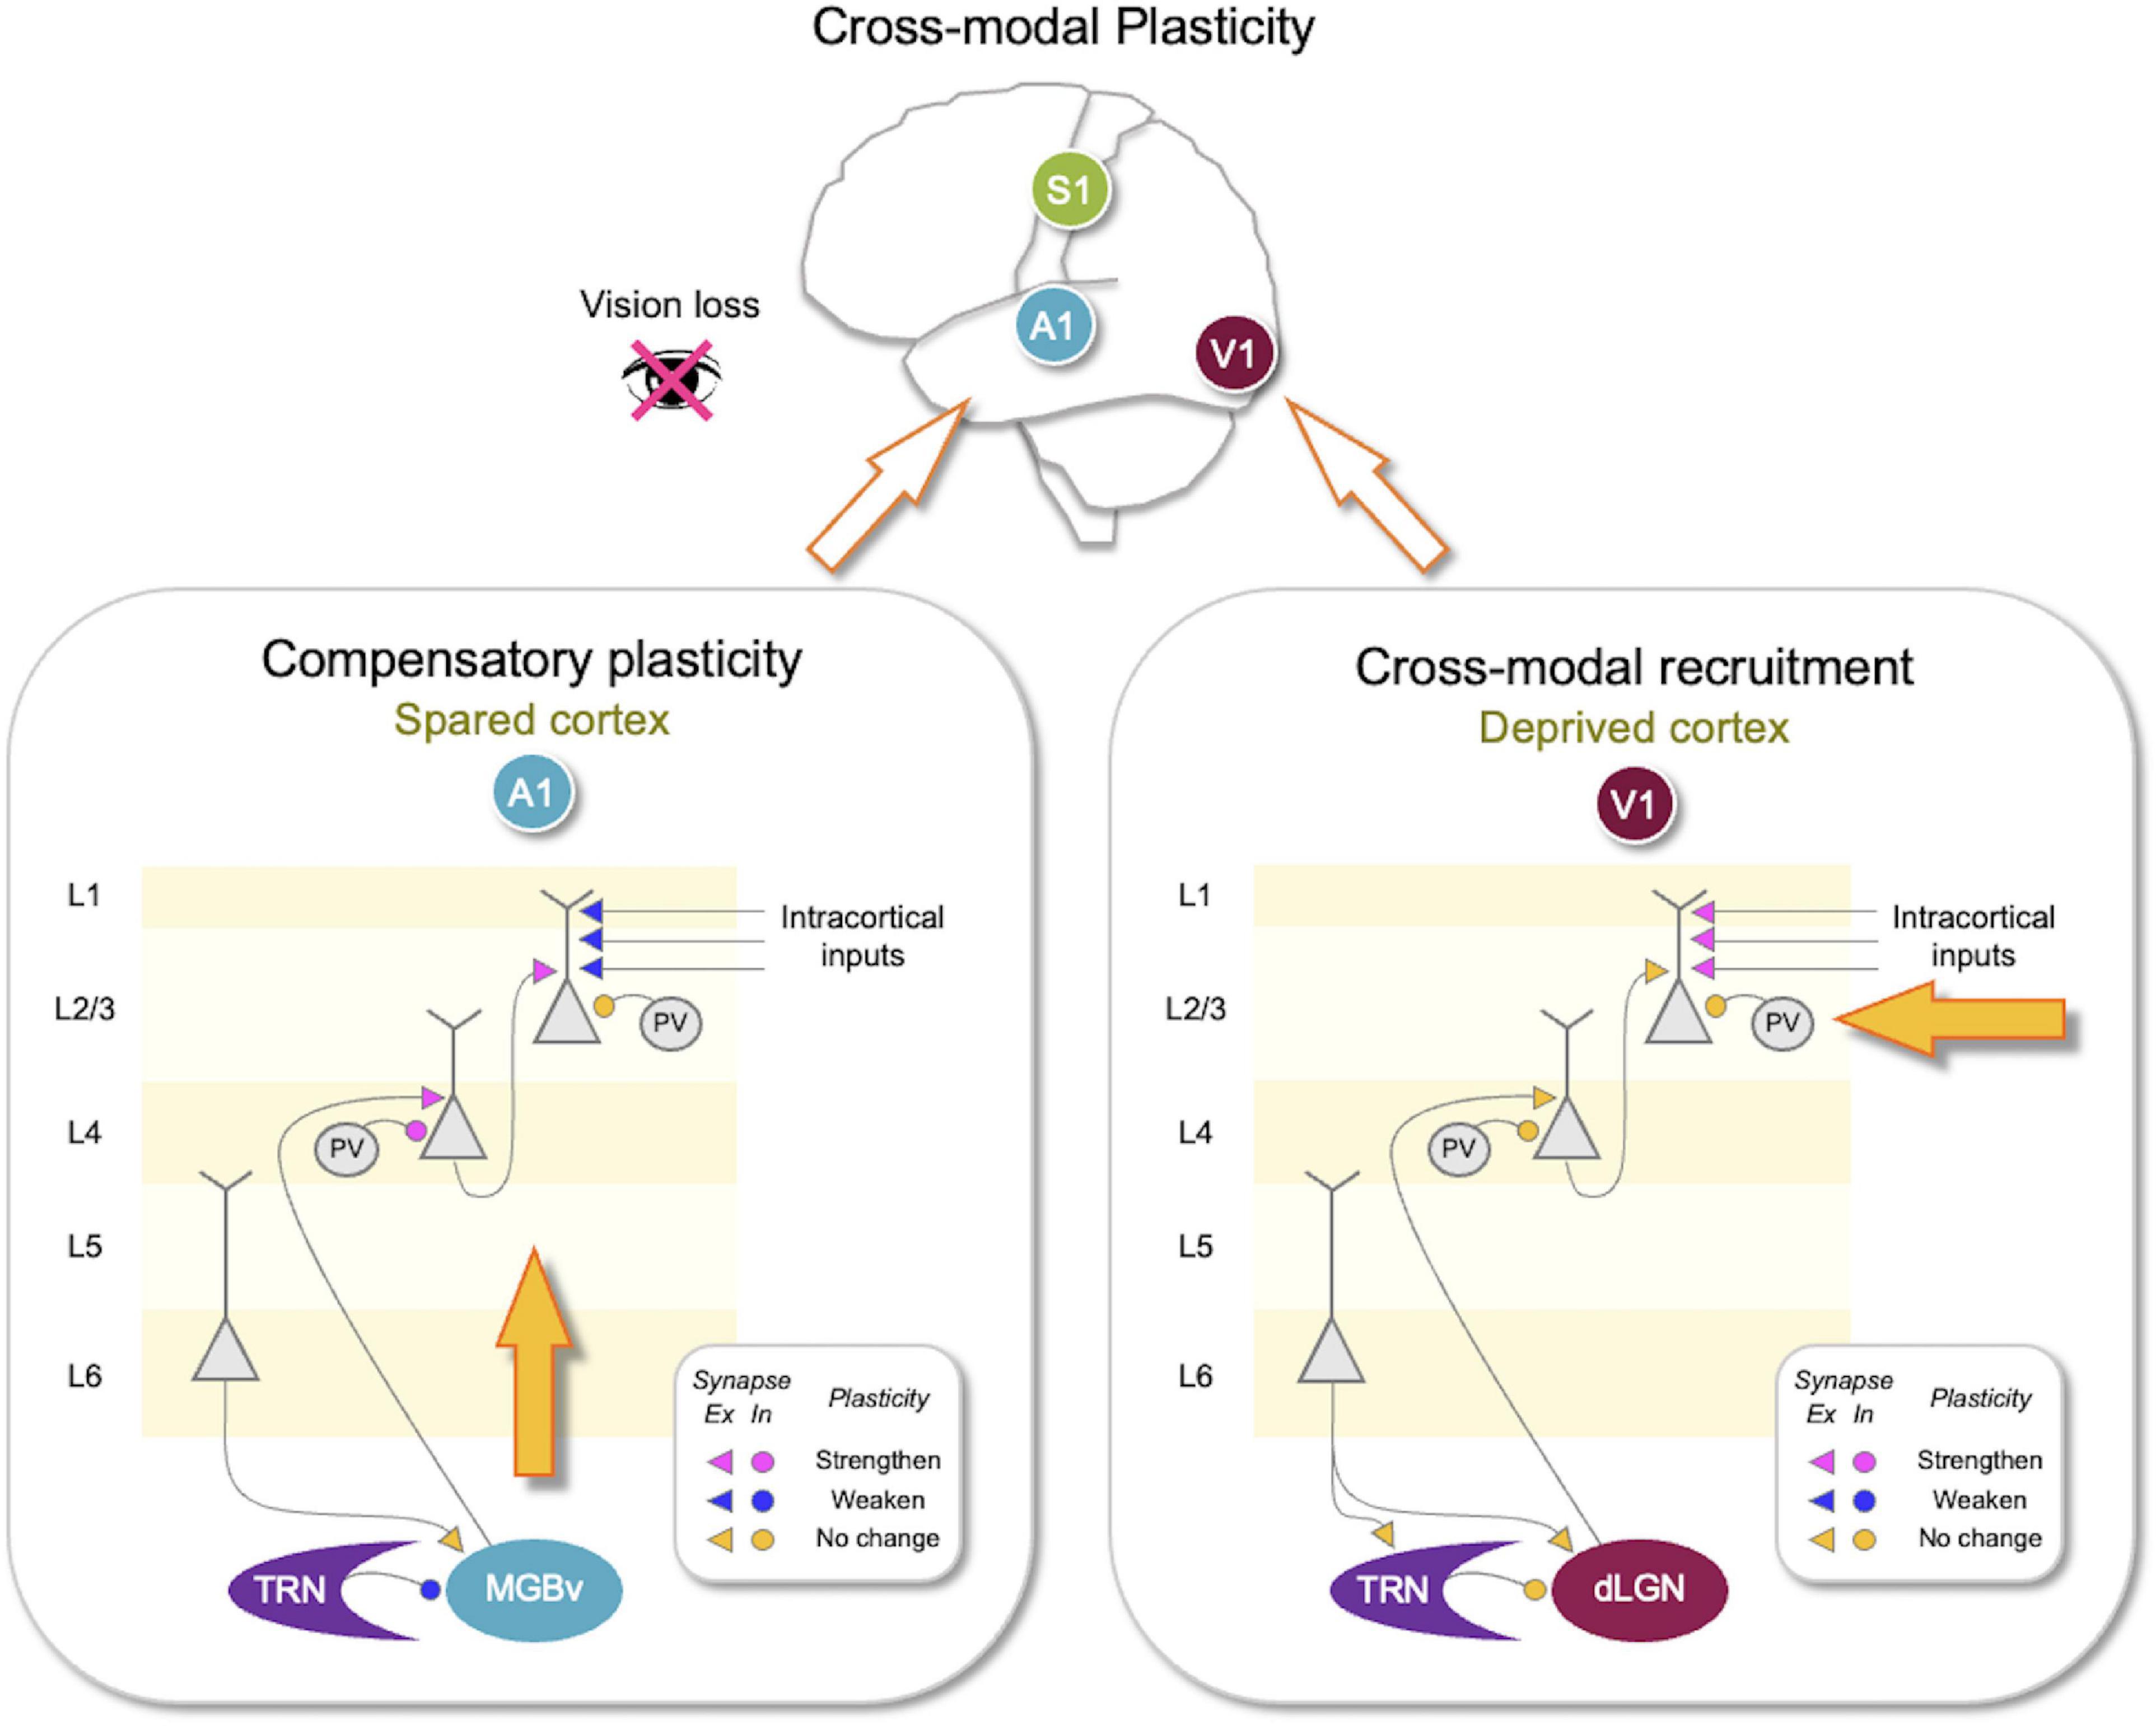 Metaplasticity framework for cross-modal synaptic plasticity in adults